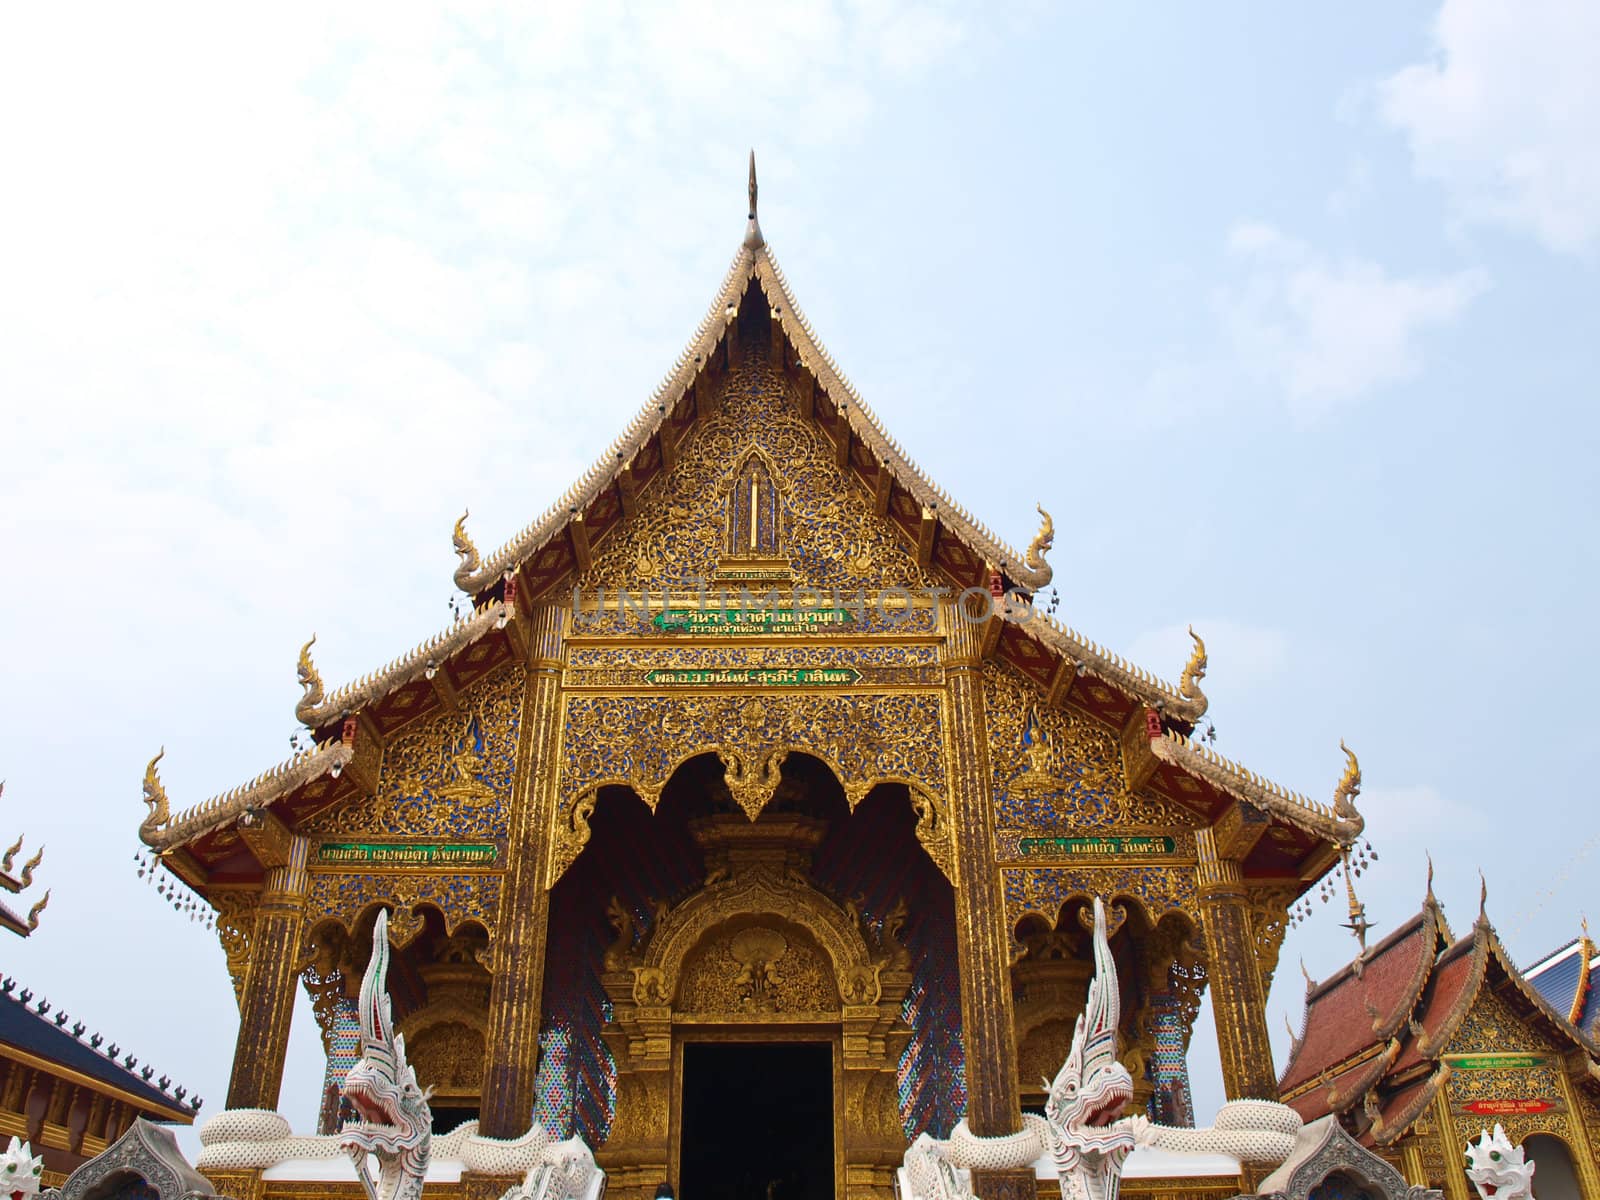 A golden buddhist monastery in Wat Baan Den in Chiang Mai, Thailand built by Northern Thai architectural style